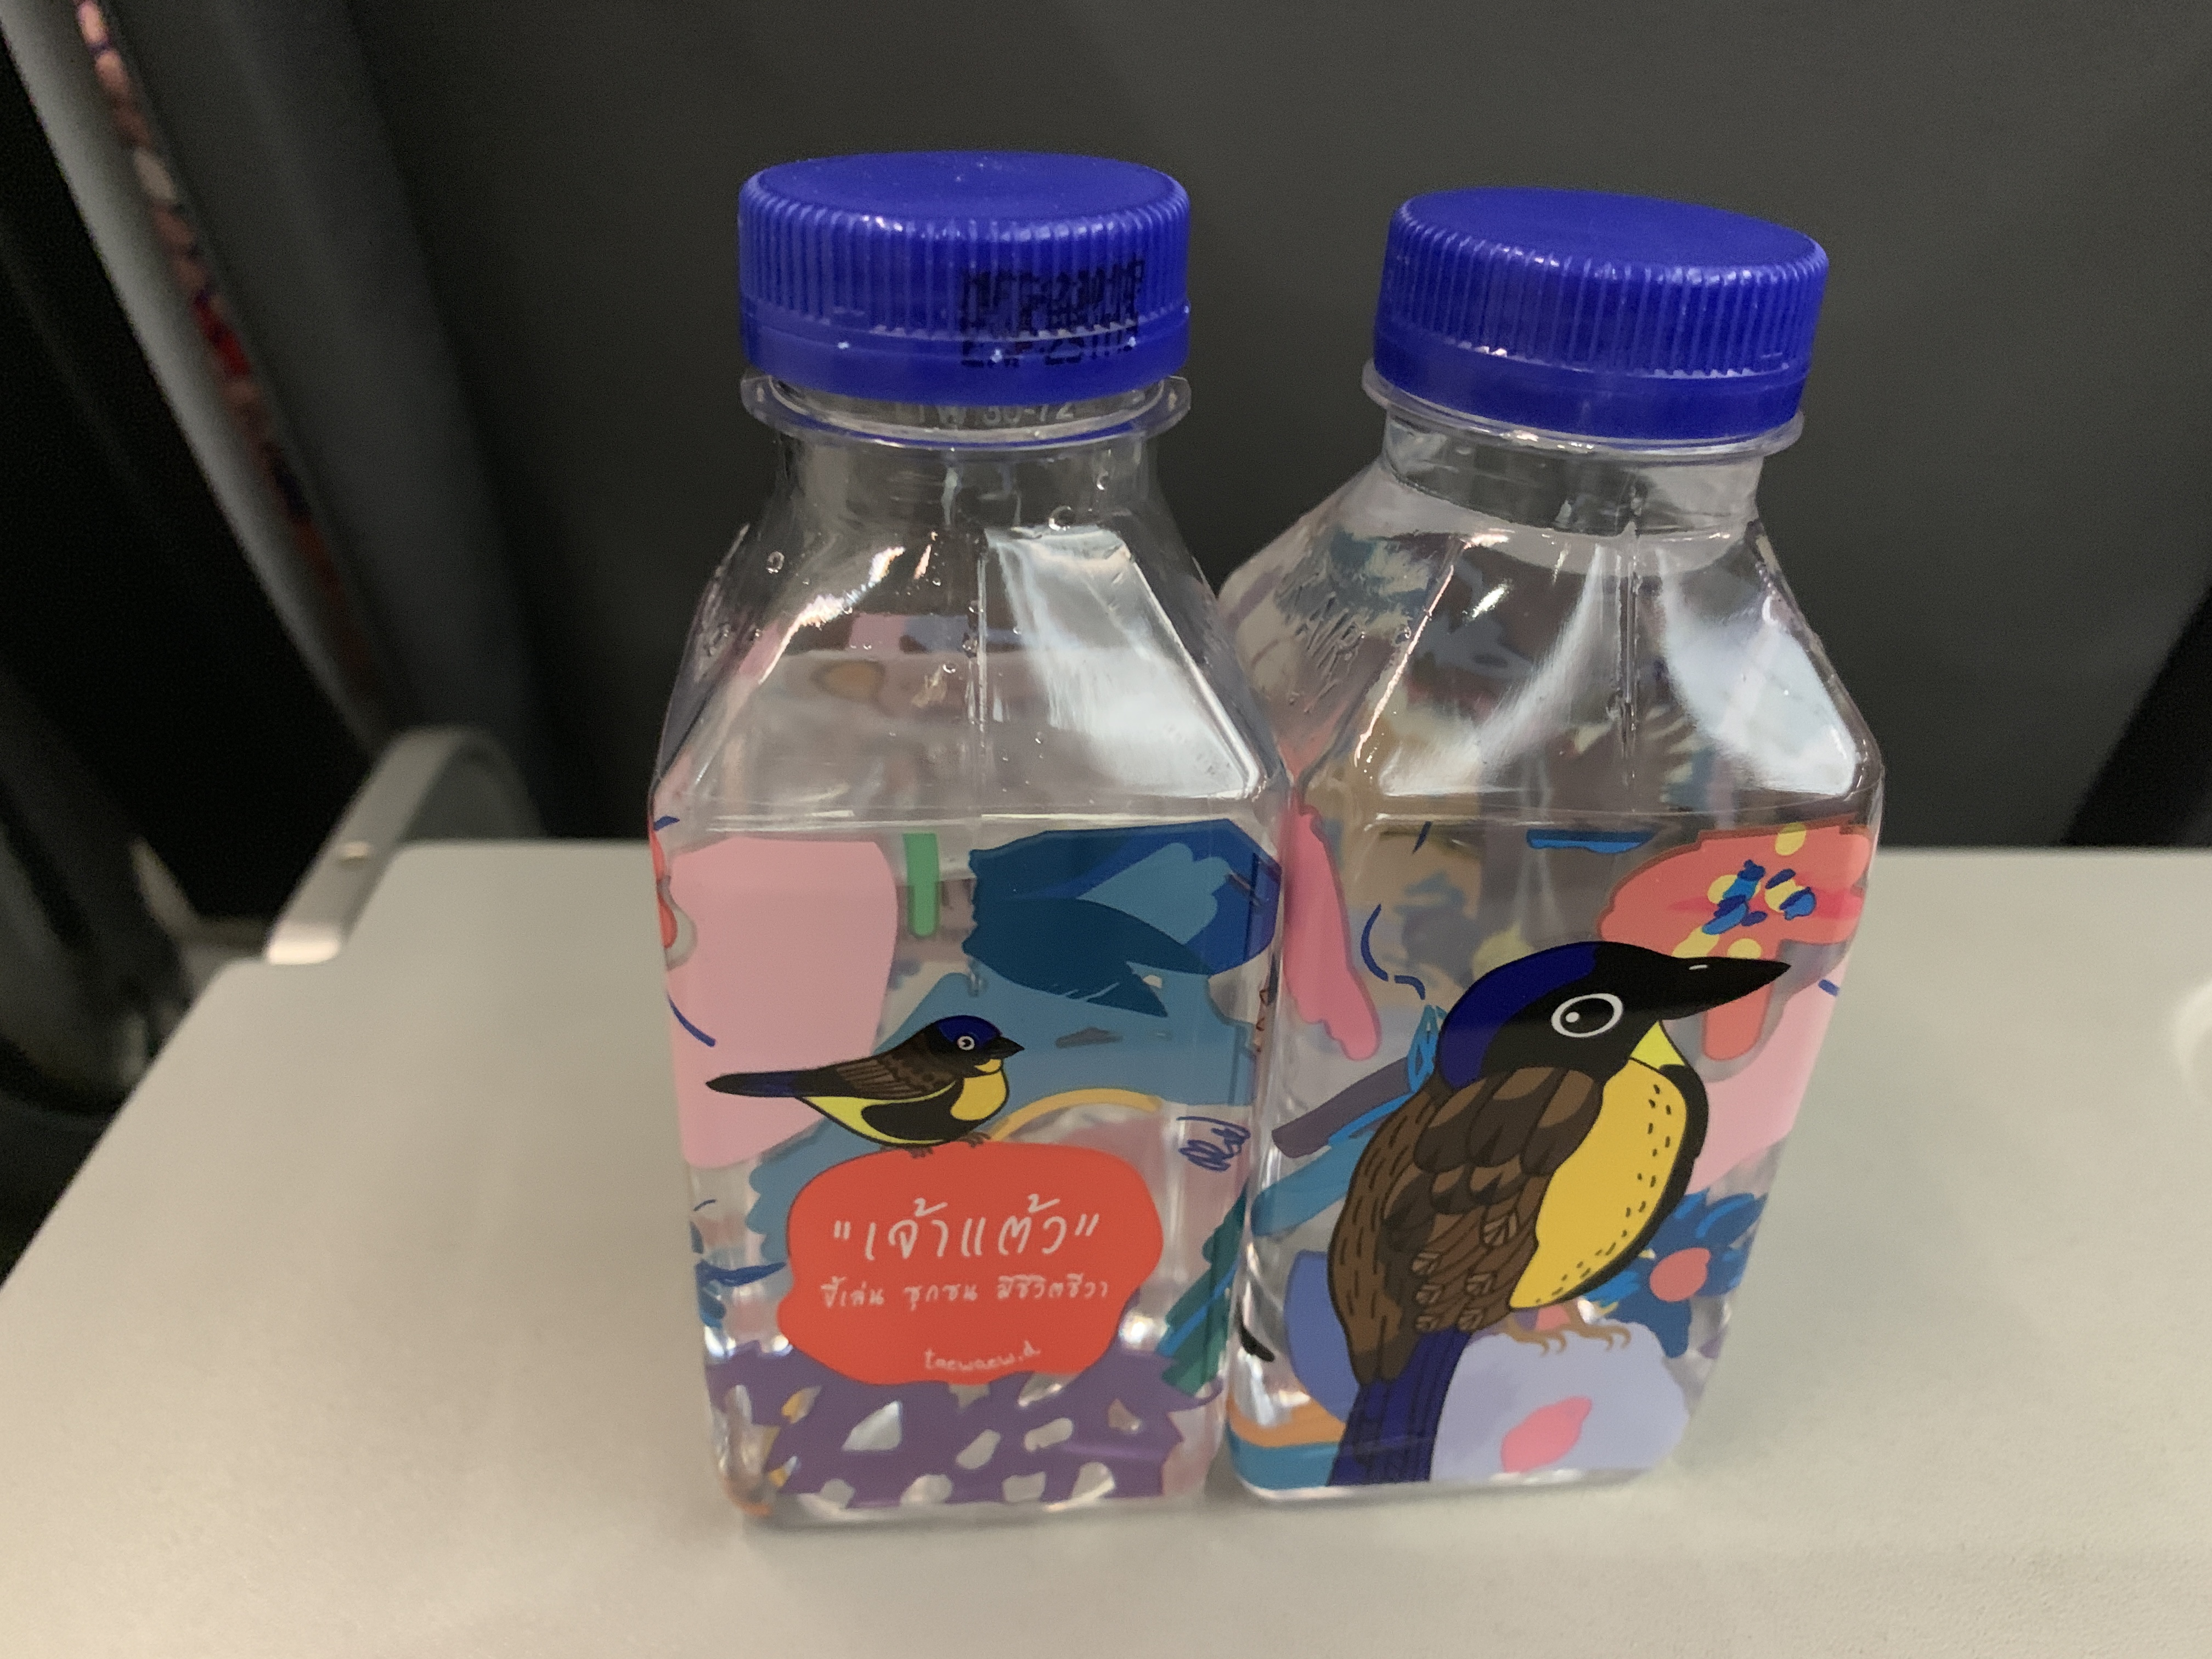 two plastic bottles with colorful designs